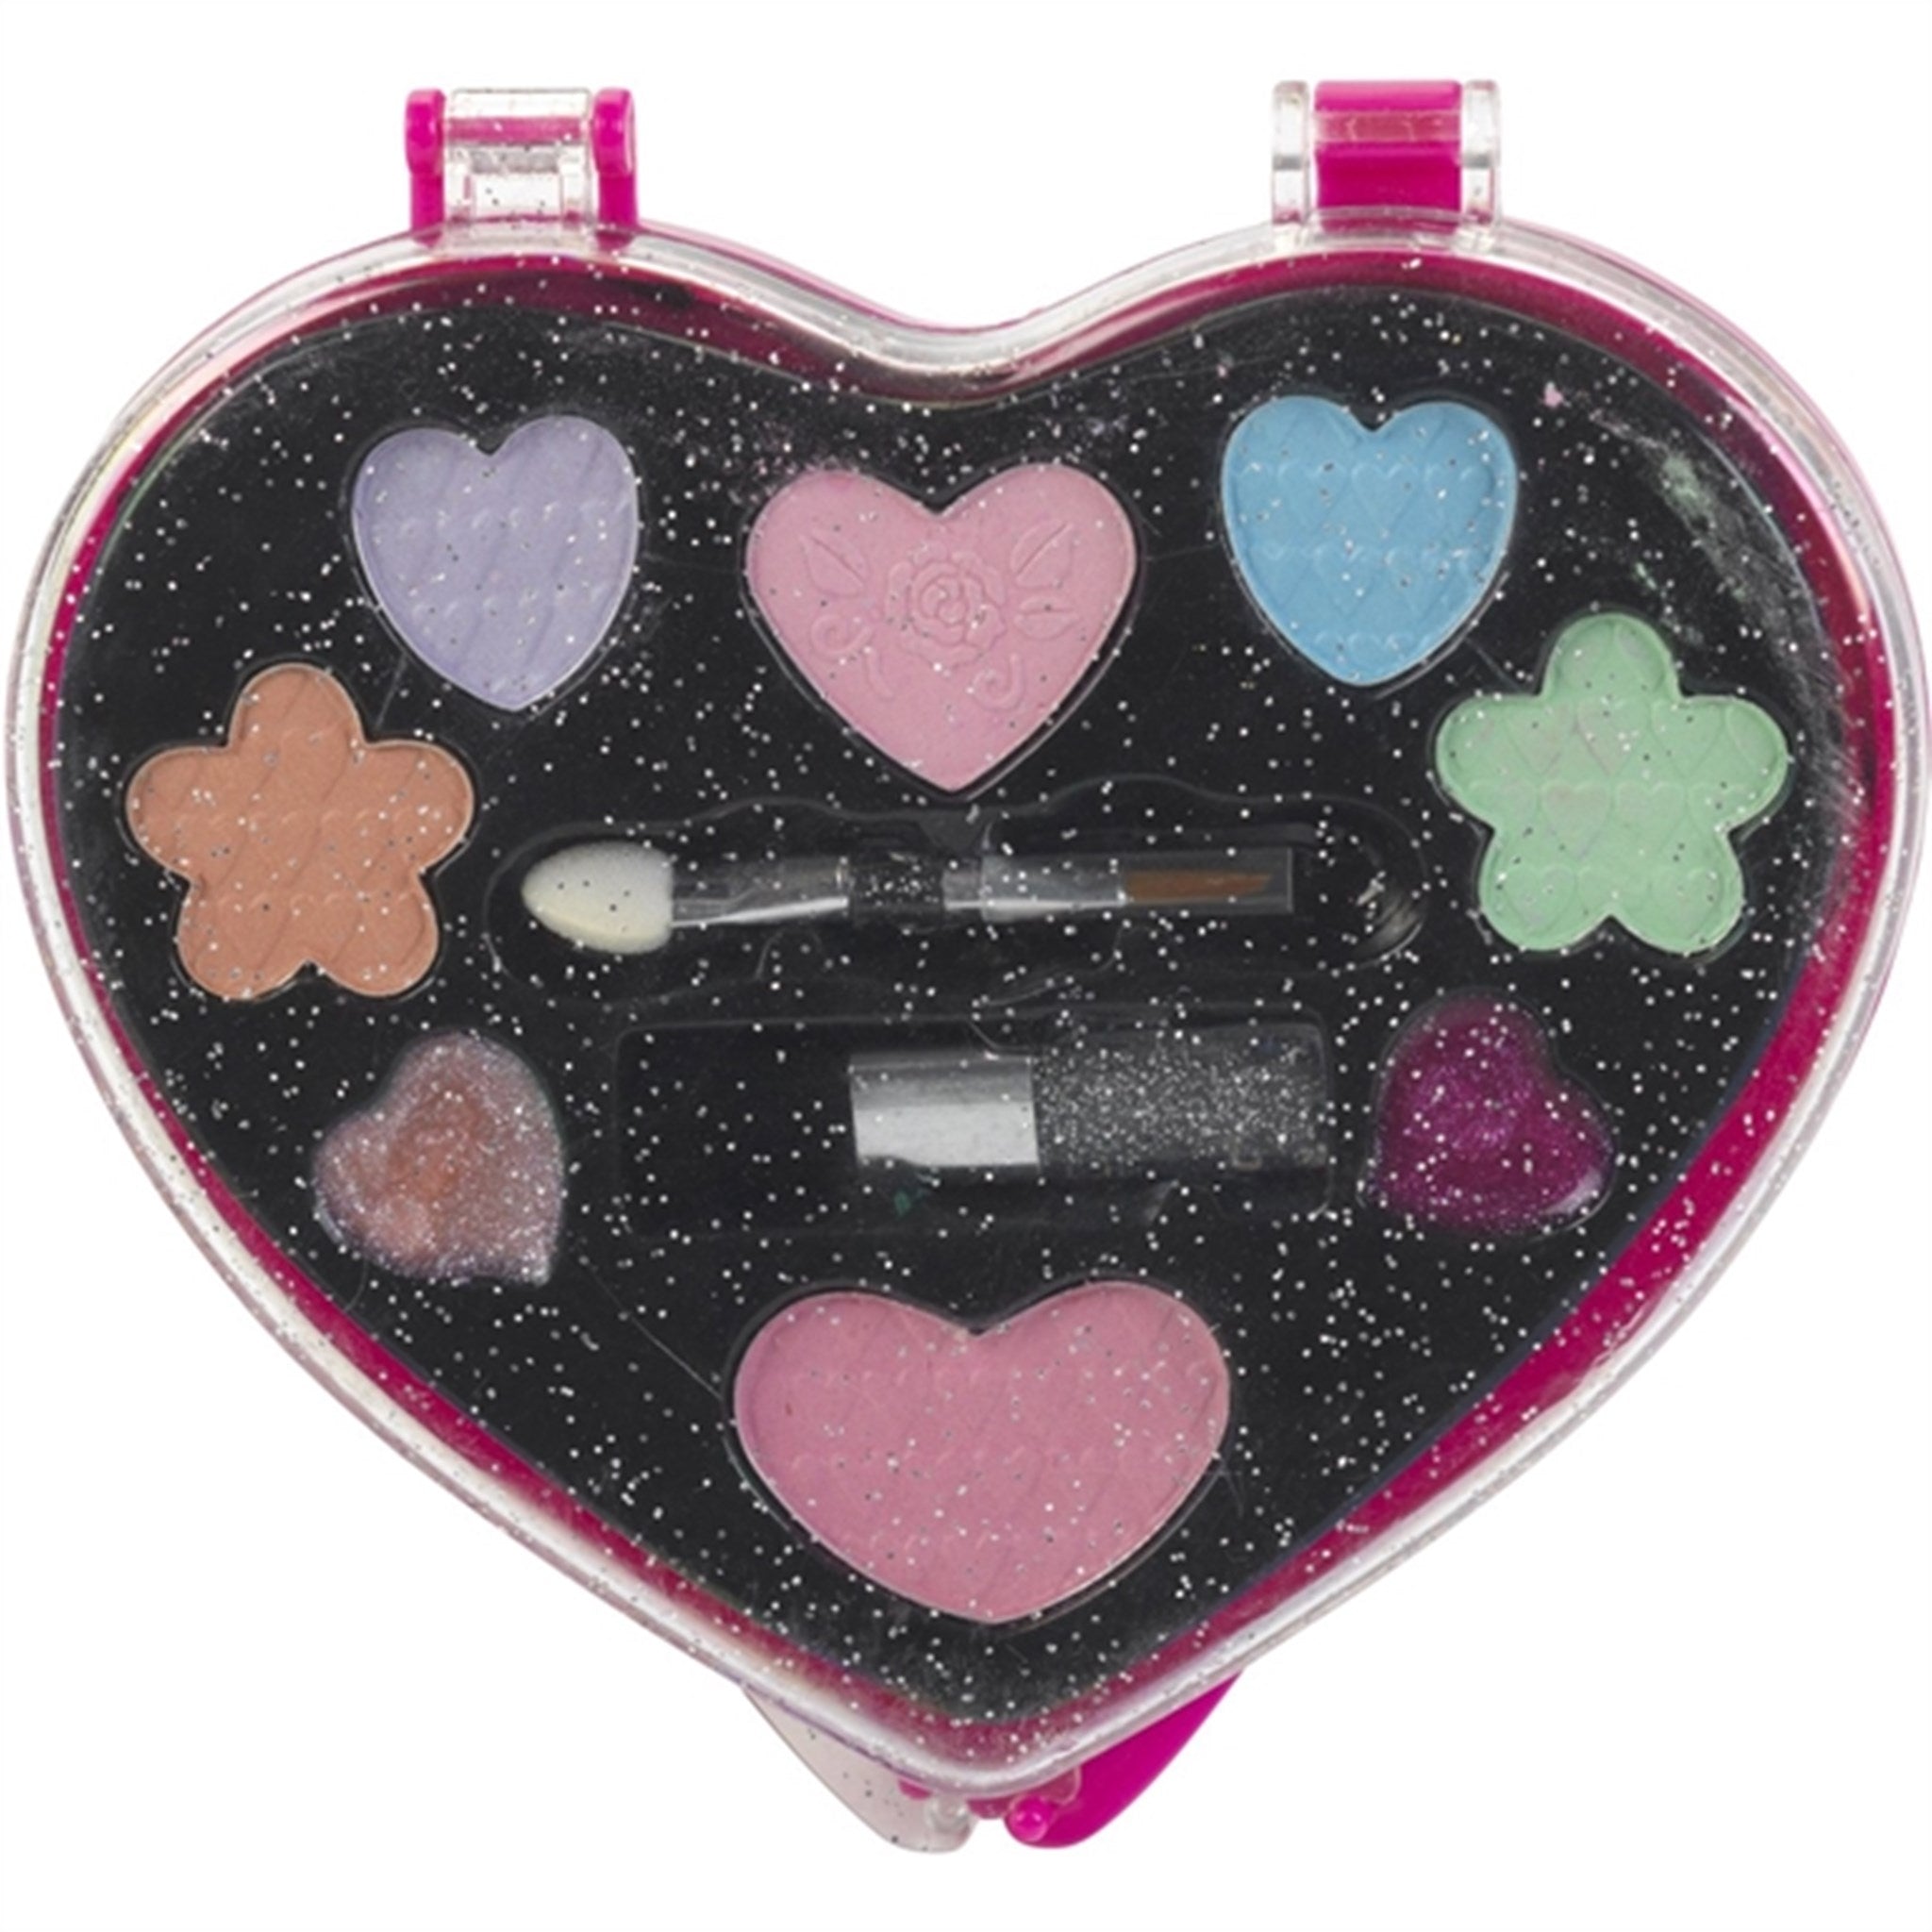 Klein Makeup set in Heart-shaped Box